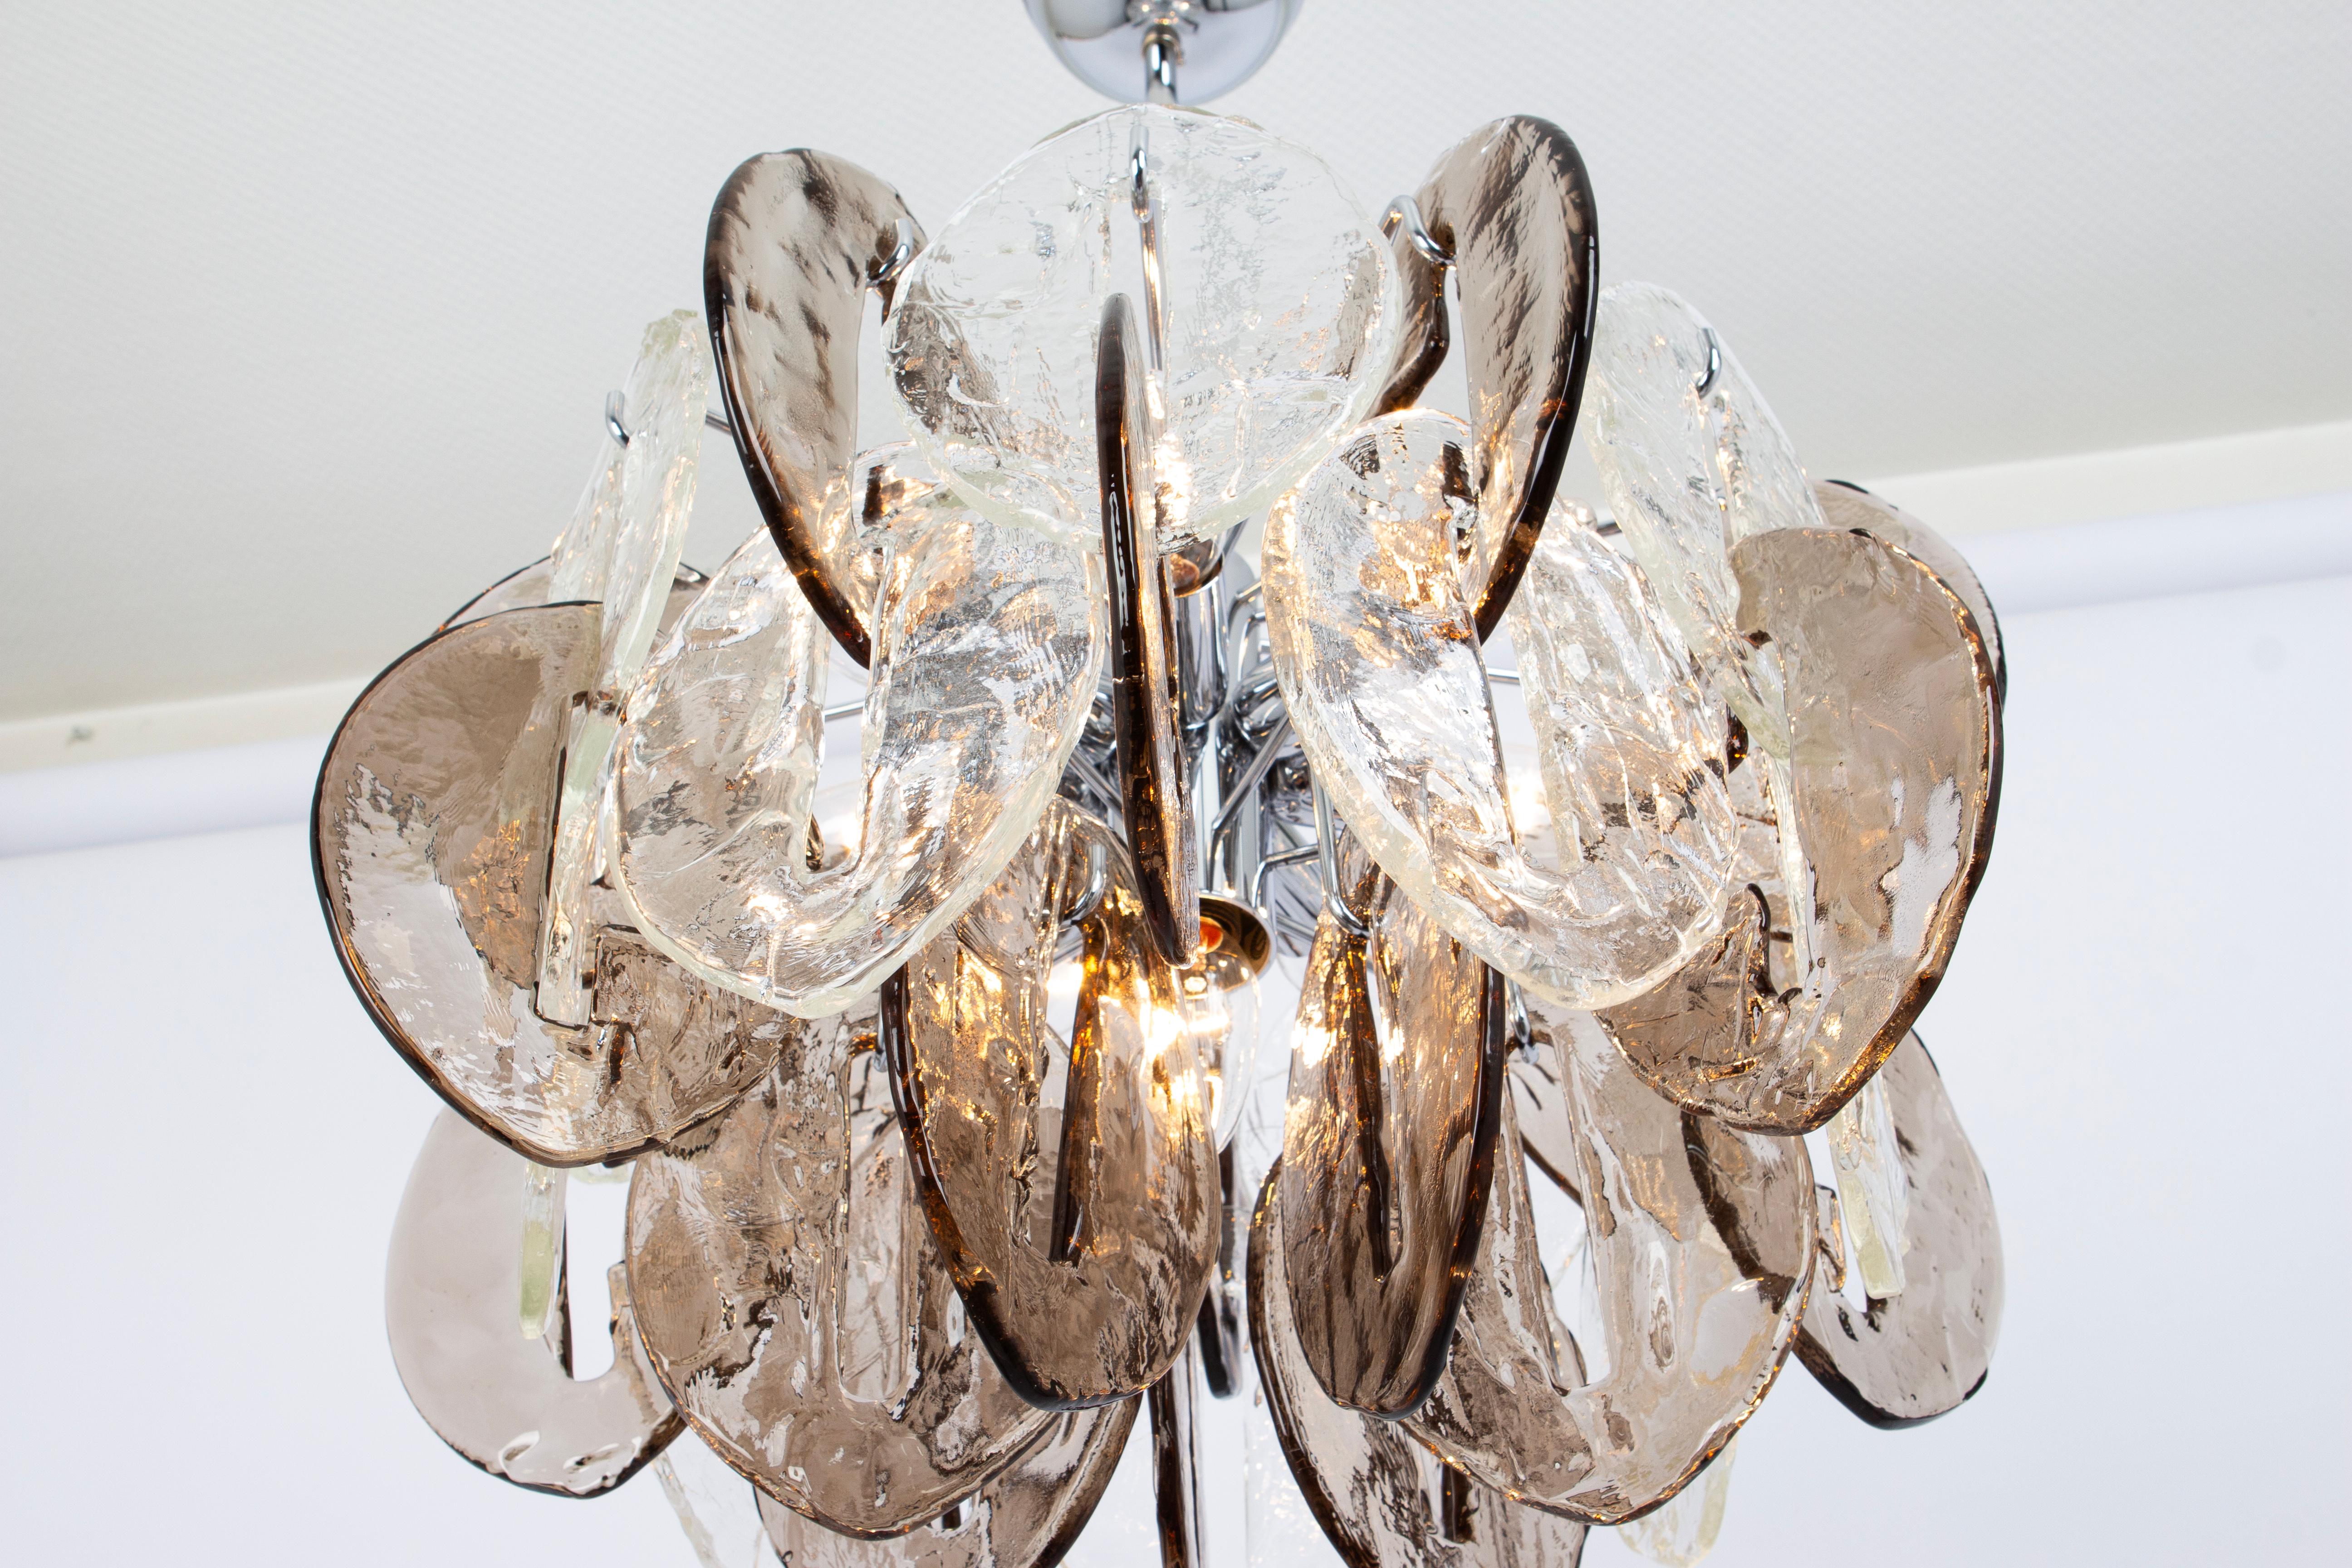 A stunning Large Murano glass Chandelier designed by Carlo Nason for Kalmar, Austria, manufactured in the 1970s. (Serie: CEO)
The Chandelier is composed of 35 thick textured glass elements attached to a chrome metal frame.
Elevate your surroundings